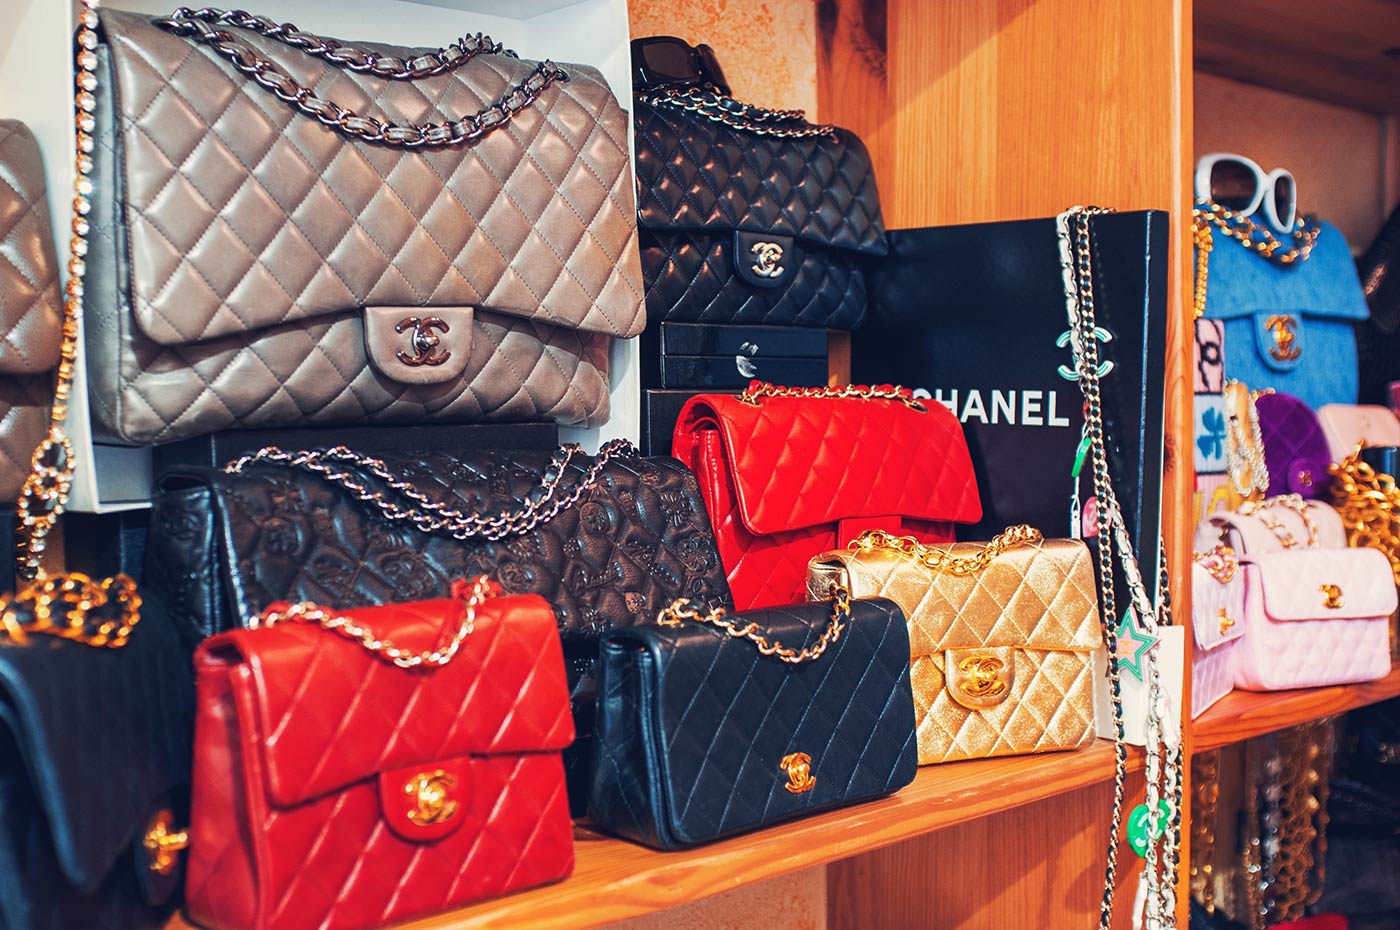 Chanel Price Increase 2015